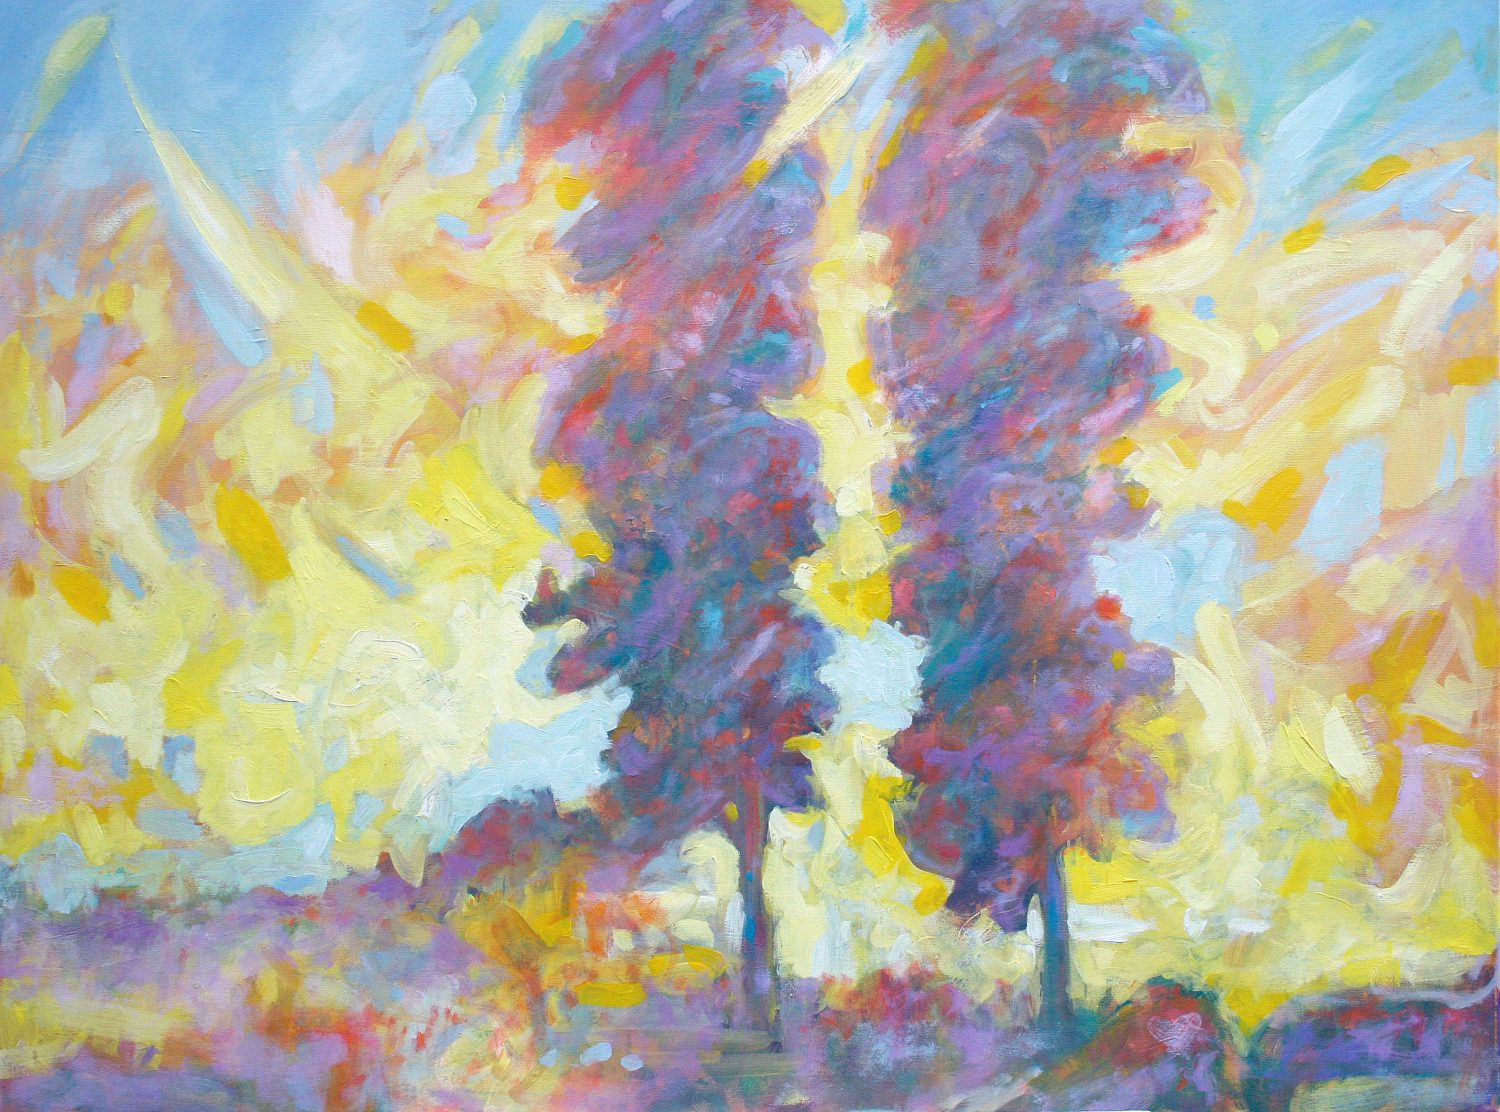 thumbnail of Morning by American artist Norman Gorbaty. medium: oil on canvas. dimensions: 30 x 40 inches. date: 2006